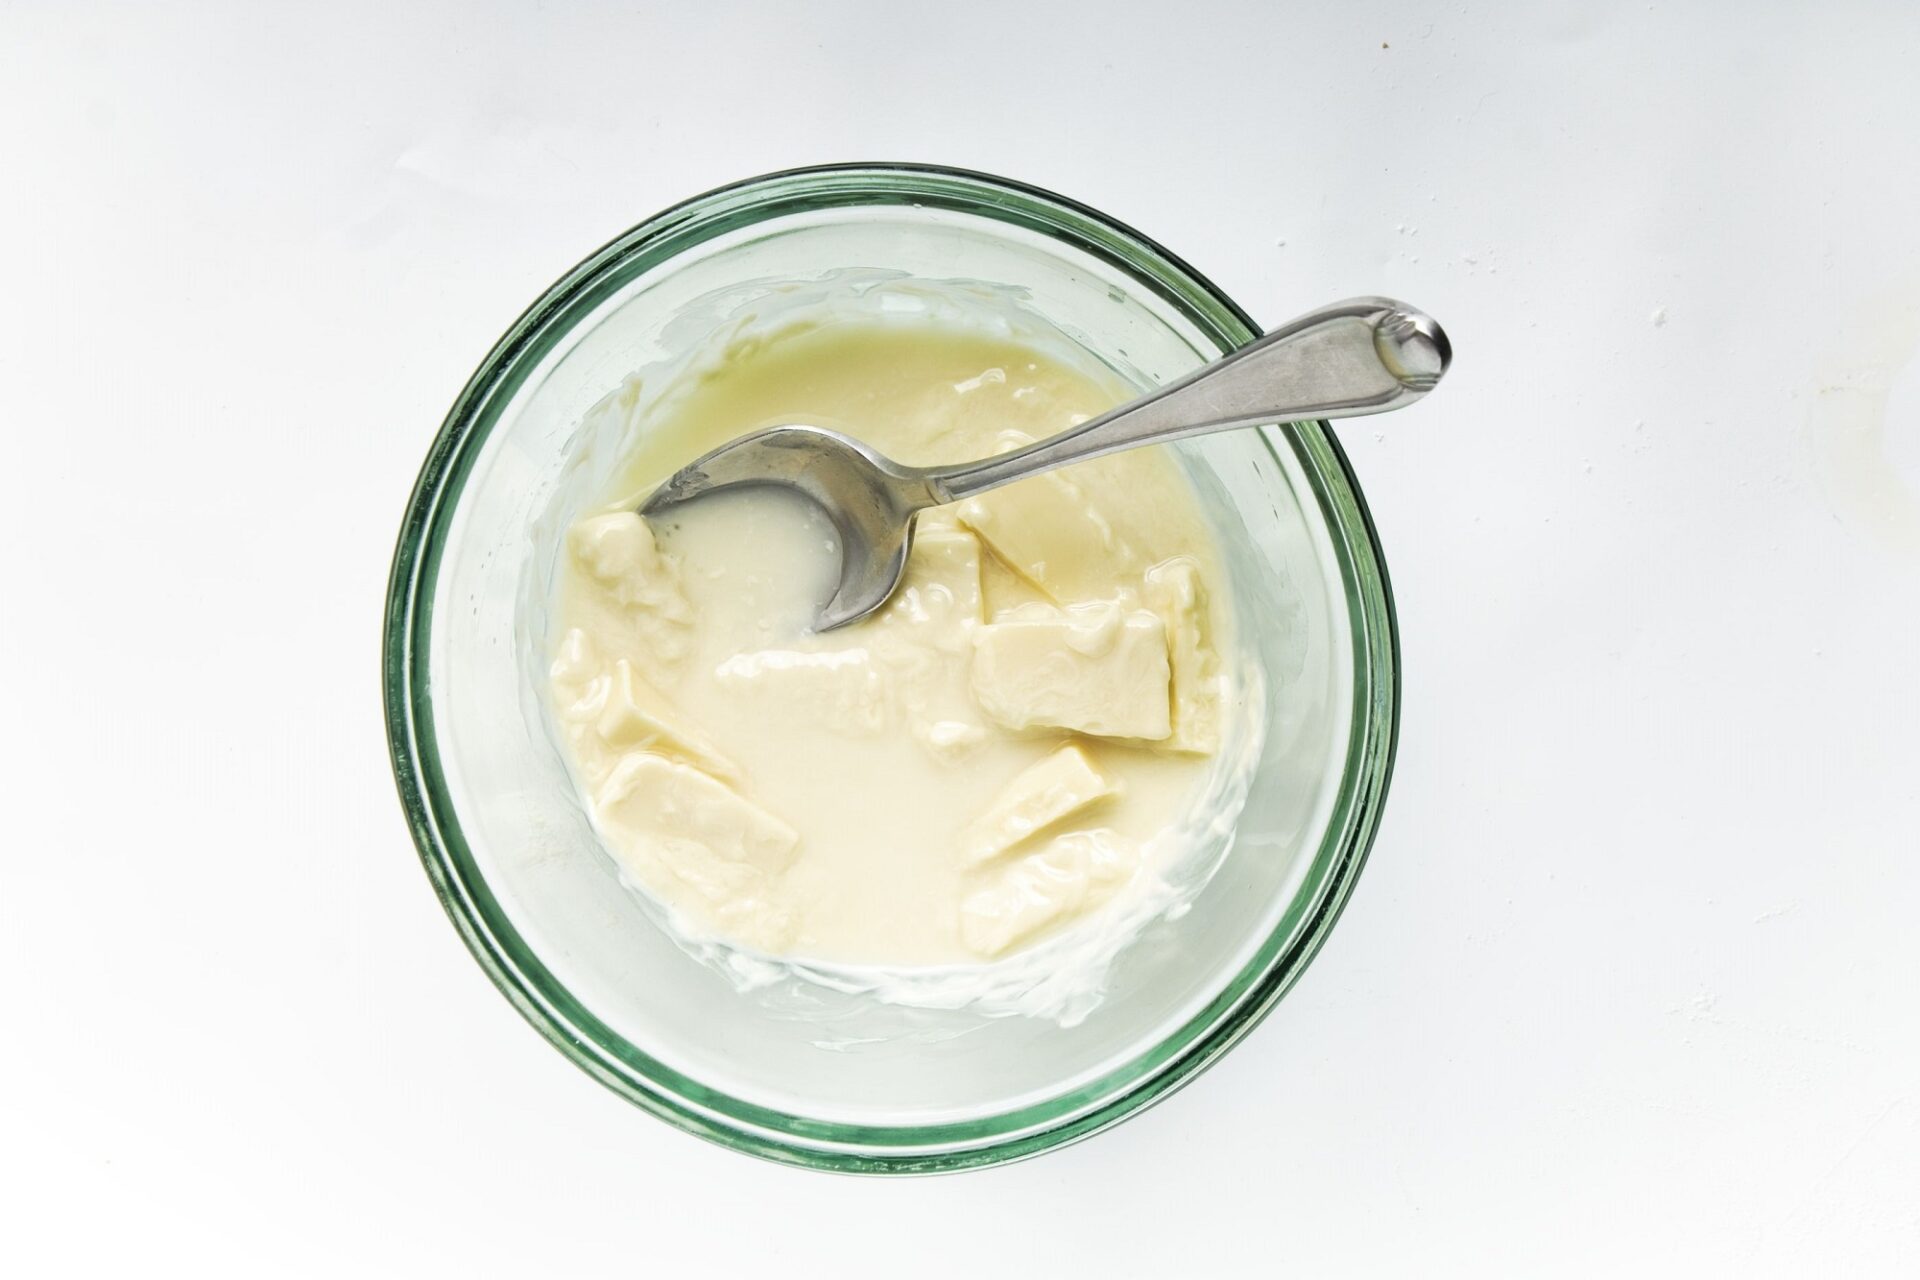 Melting white chocolate in a bowl.